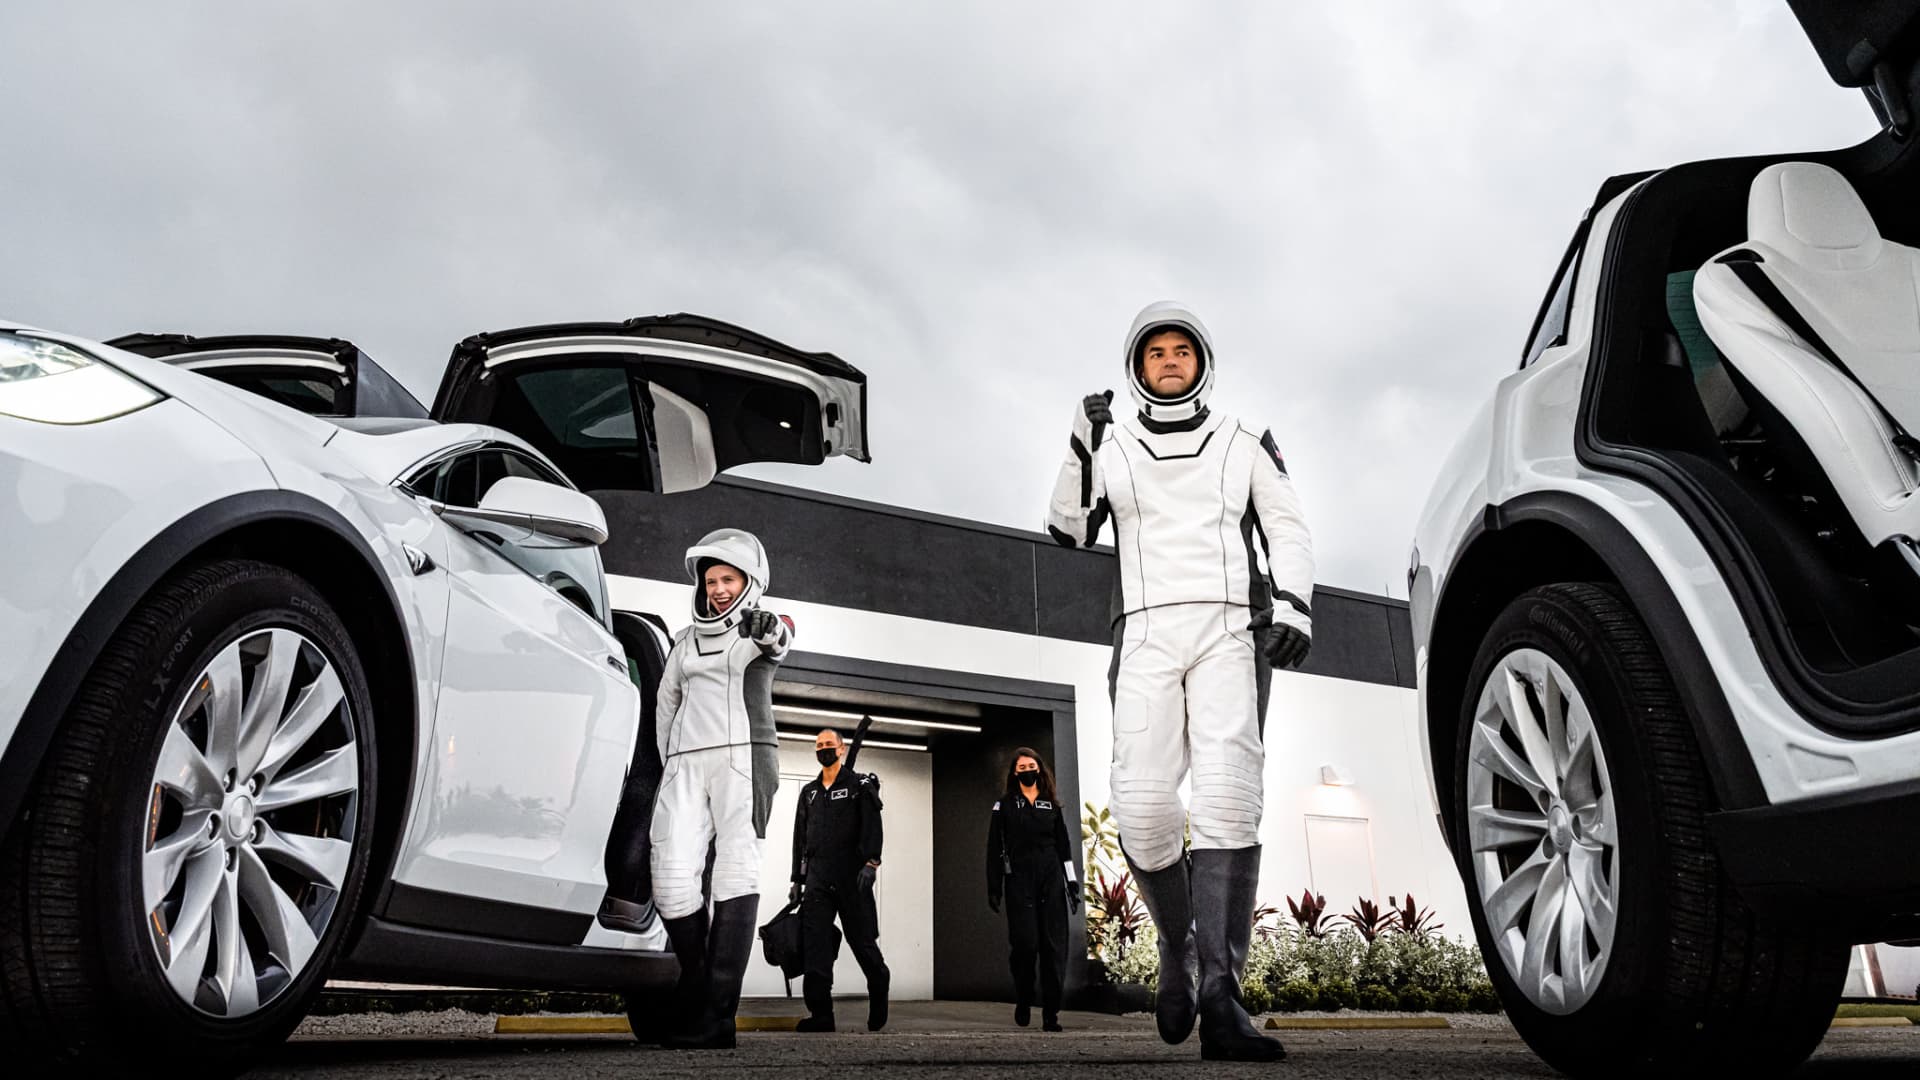 Hayley Arceneaux, left, and Jared Isaacman walk out and board the Tesla Model Xs that will take them to the launchpad during a launch rehearsal on September 12, 2021.